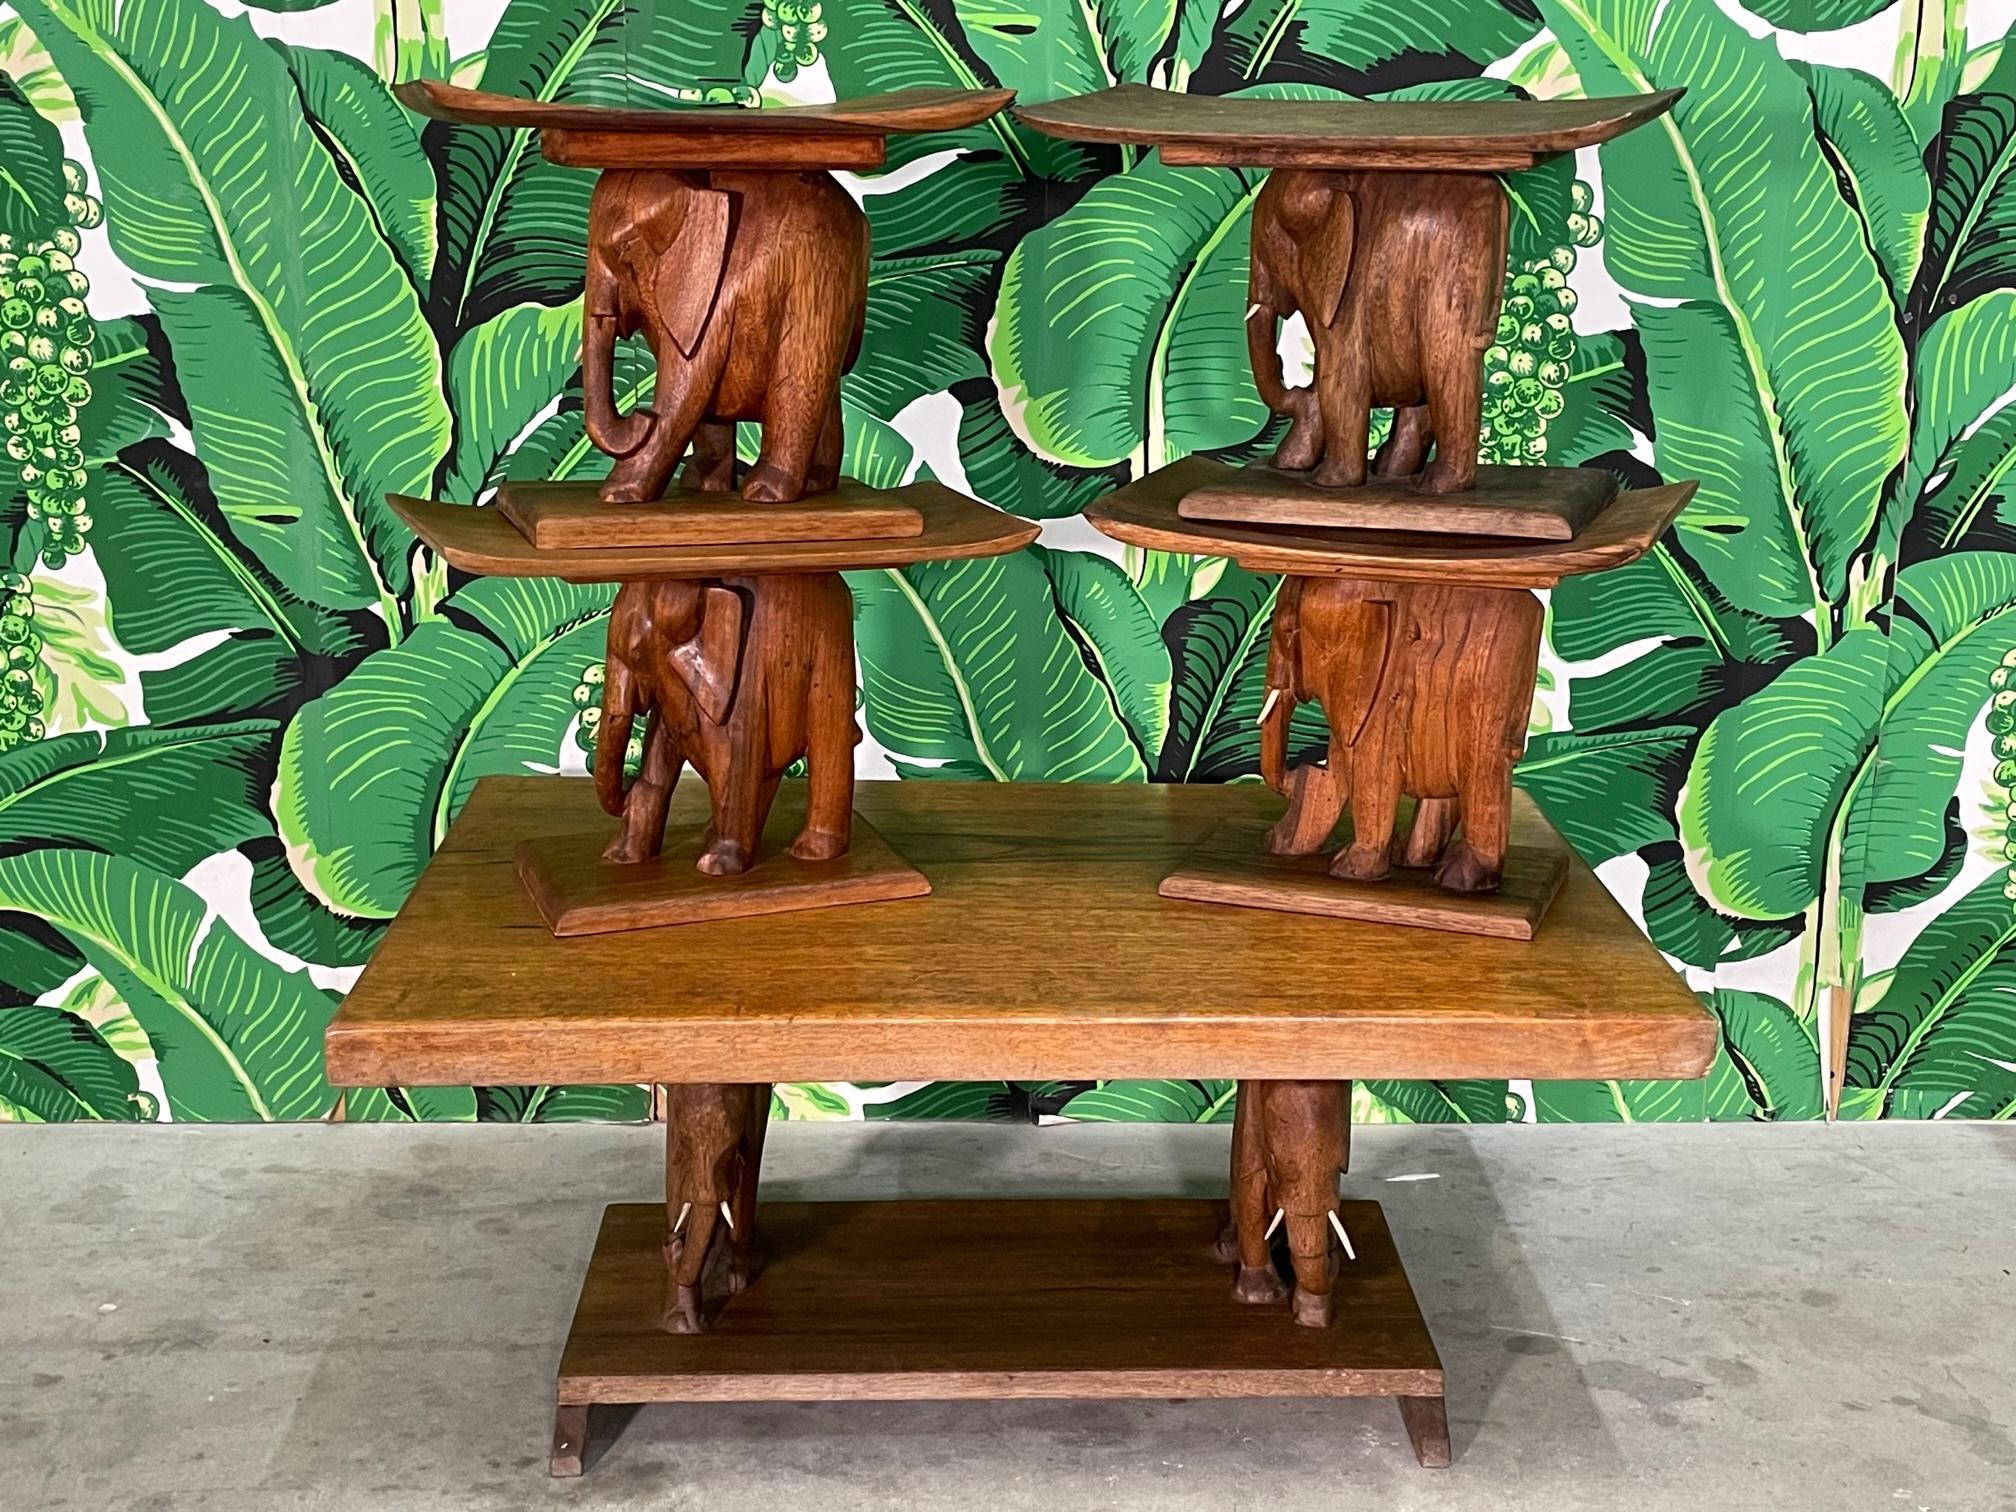 Early hand carved wood table and seats in an elephant motif, attributed to the Ashanti (Asante) or Fanti (Fante) tribes of Ghana, Africa. Circa early 20th century. Good structural condition, nice patination throughout. May exhibit scuffs, marks, or